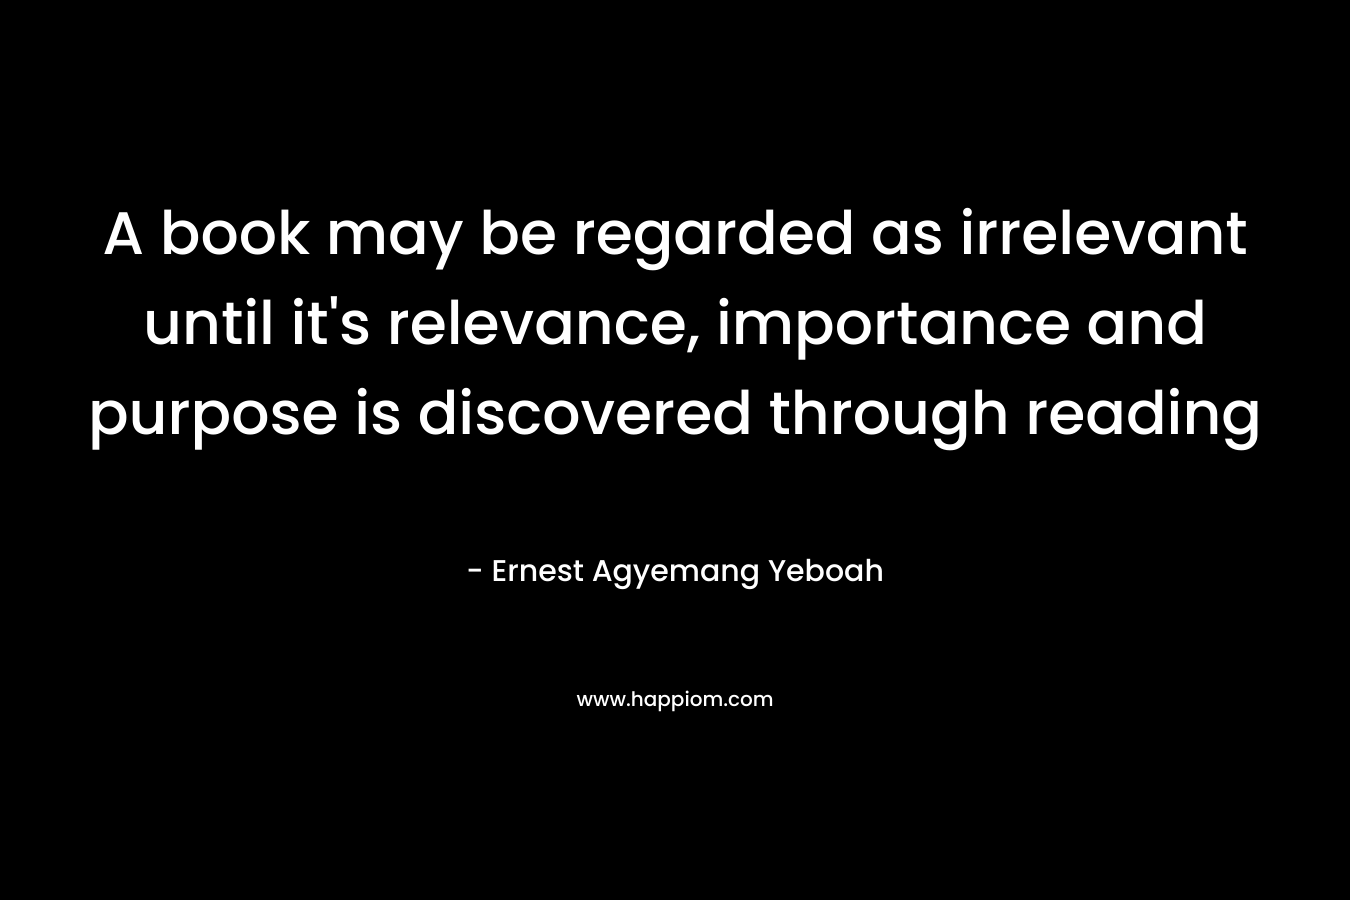 A book may be regarded as irrelevant until it’s relevance, importance and purpose is discovered through reading – Ernest Agyemang Yeboah